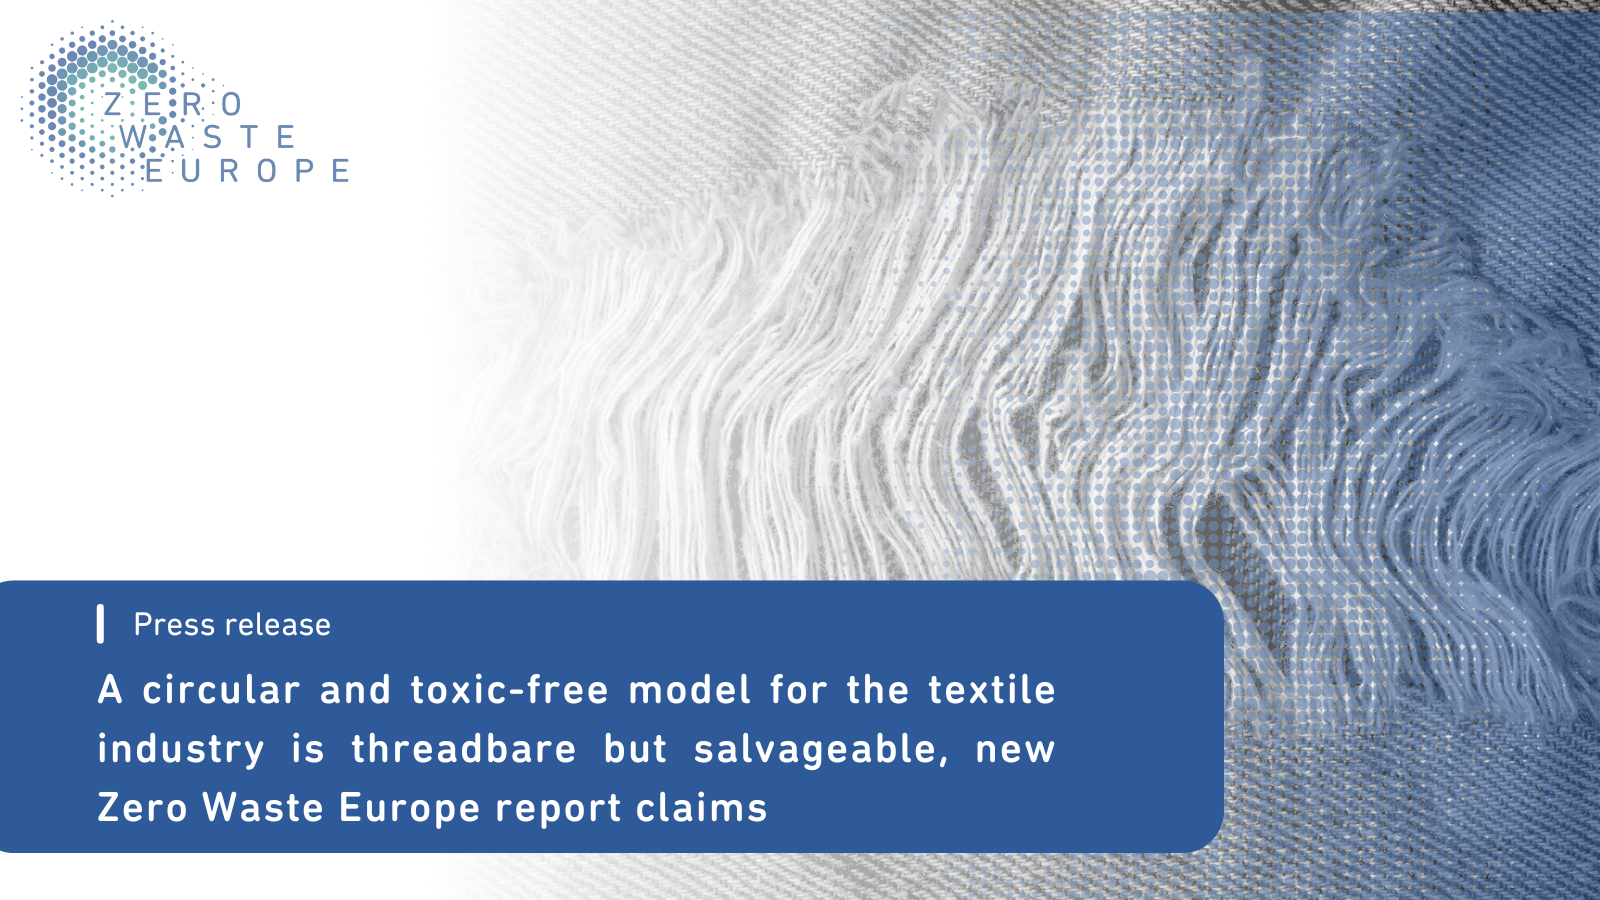 A circular and toxic-free model for the textile industry is threadbare but salvageable, new Zero Waste Europe report claims